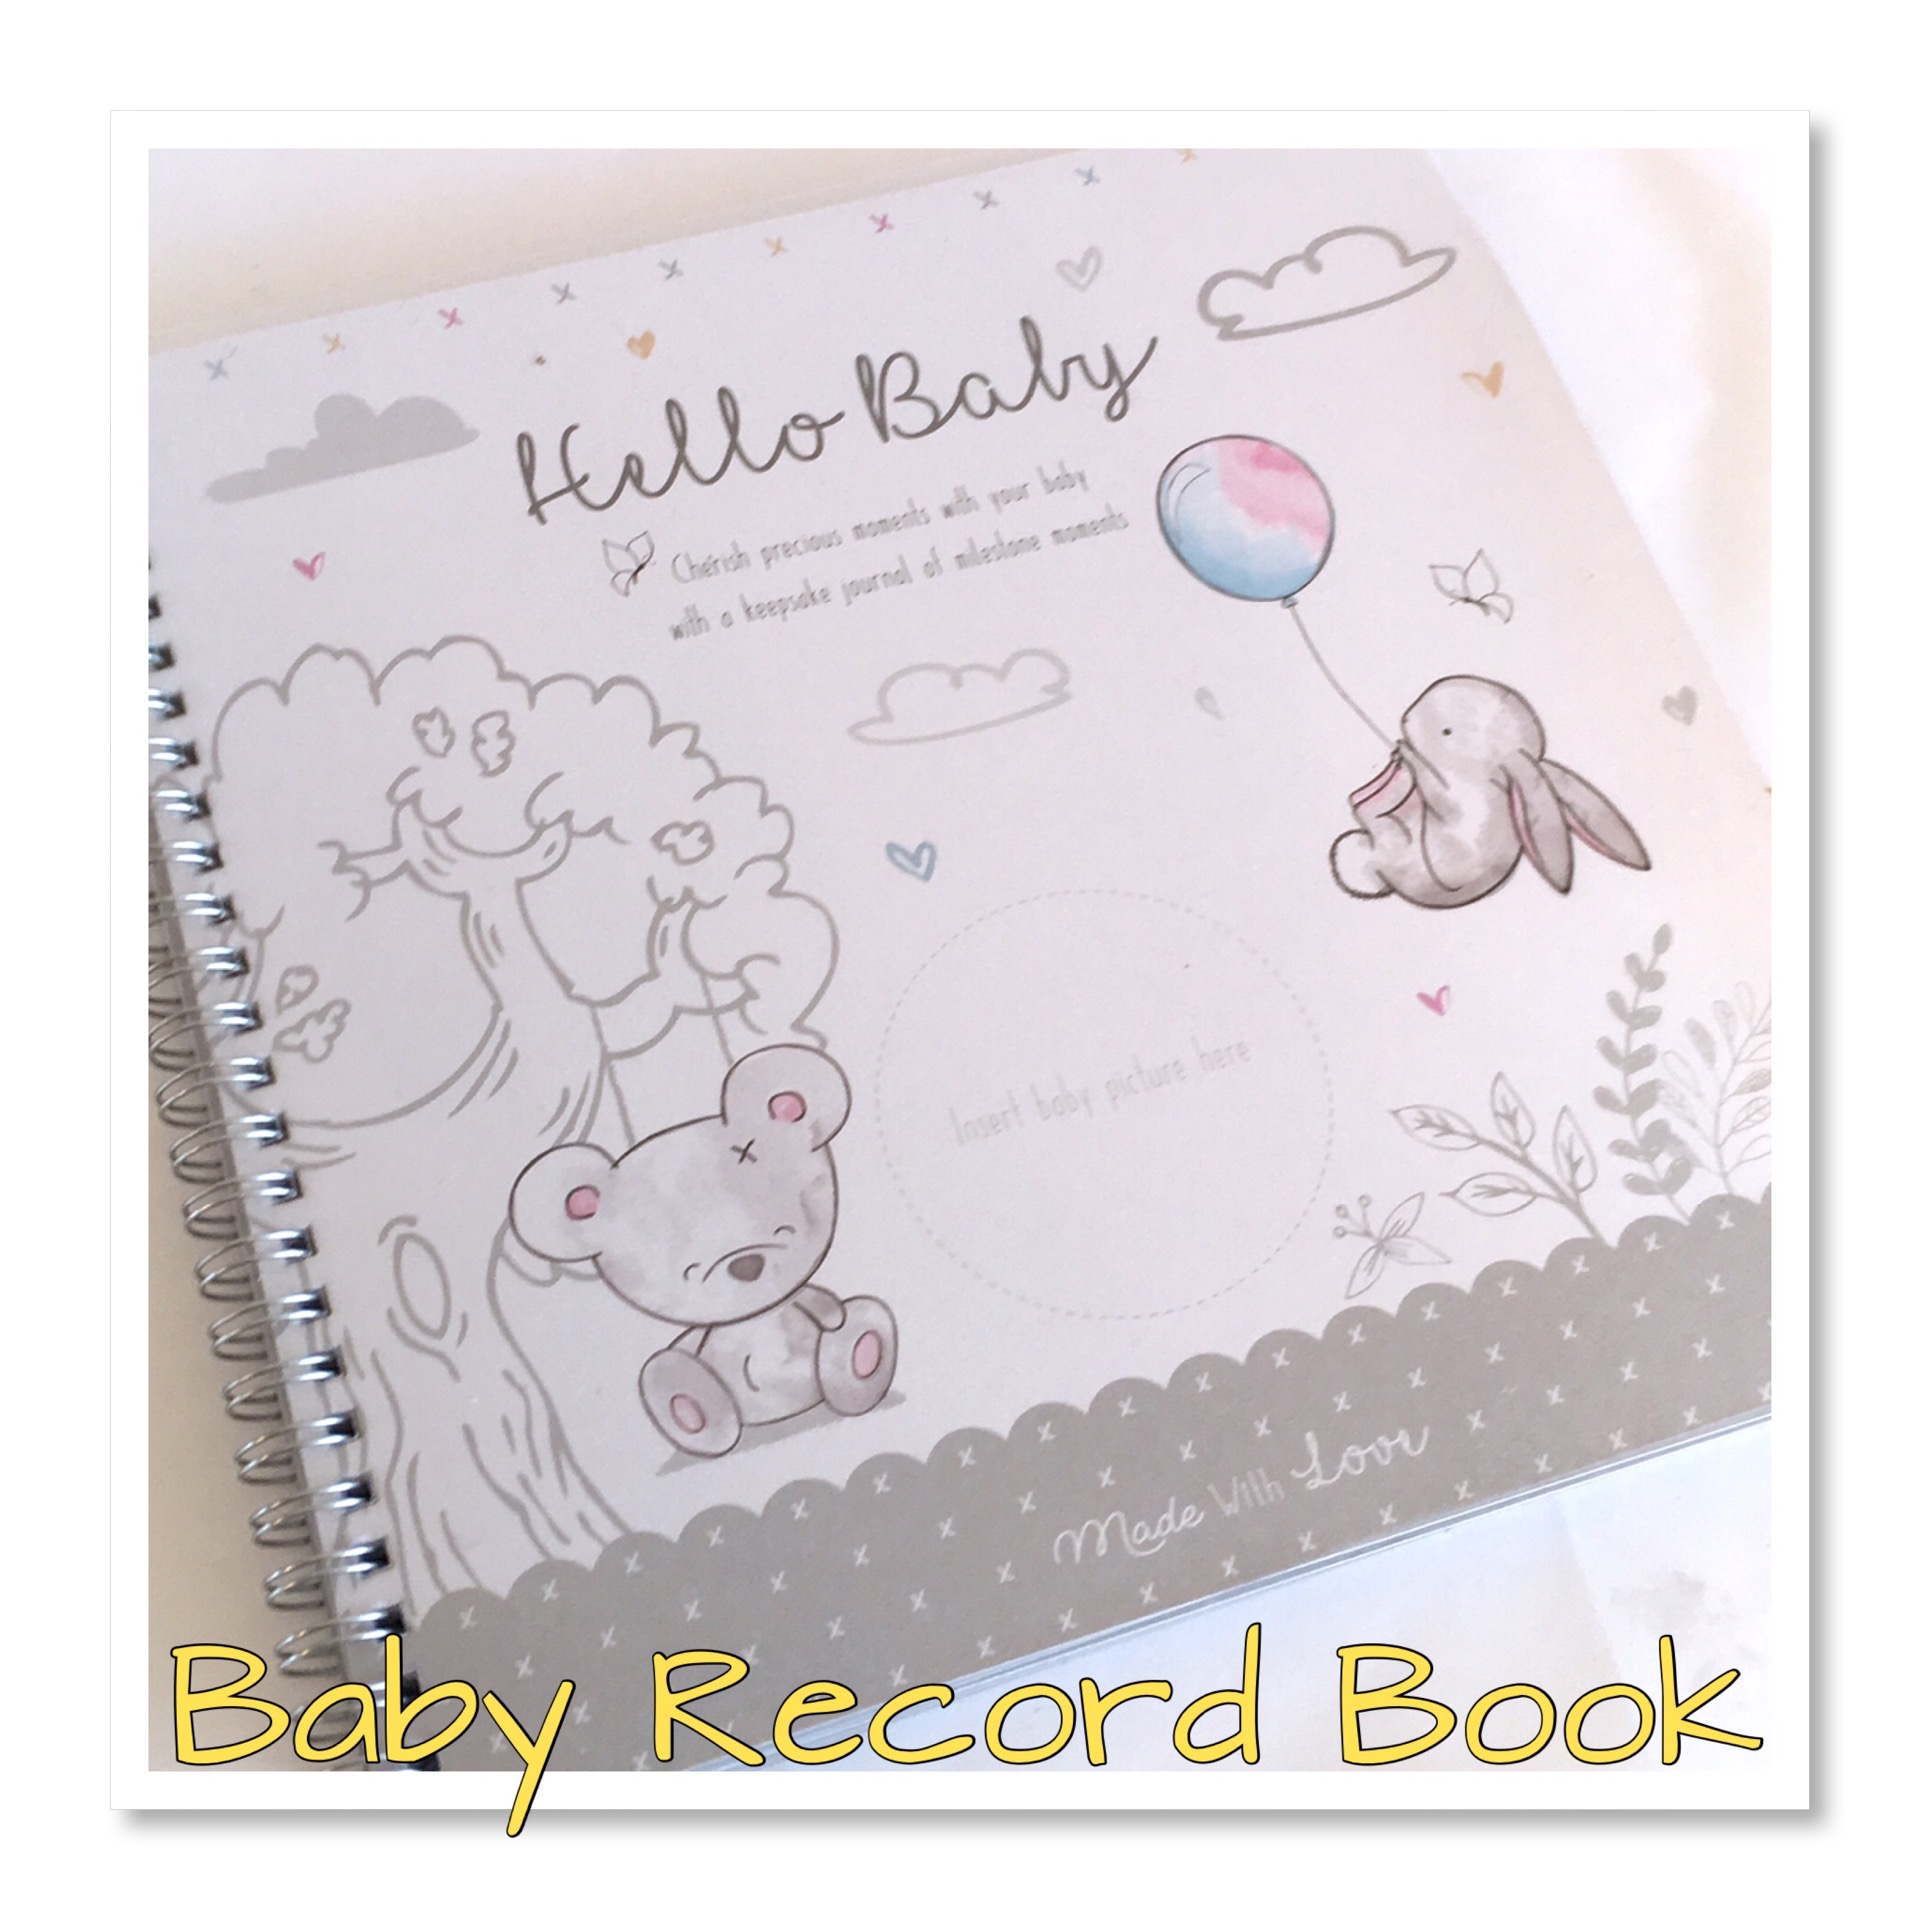 Hugs & Kisses Record Book First Year